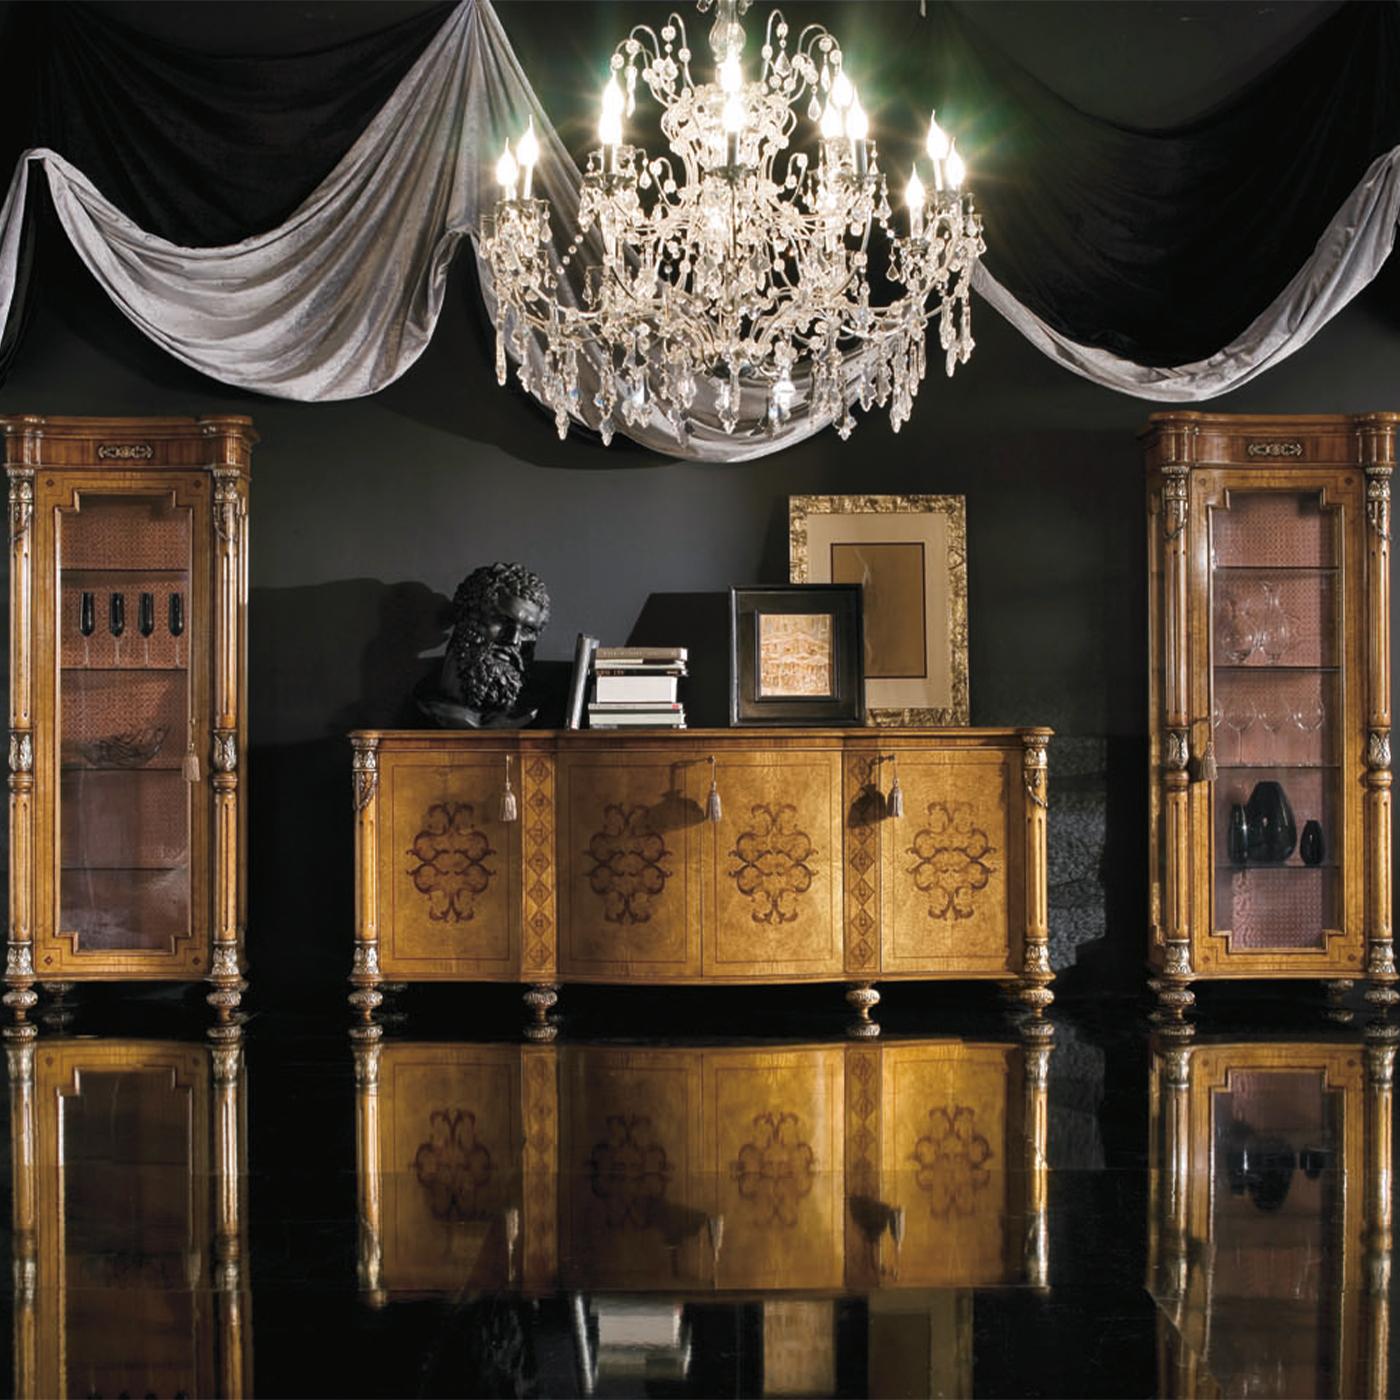 This sophisticated yet imposing wooden sideboard is an exquisite example of fine joinery. The minute and intensely decorative carved elements adorning the flattened feet and the sideboard's side elements are accented with bright silver leaf, their